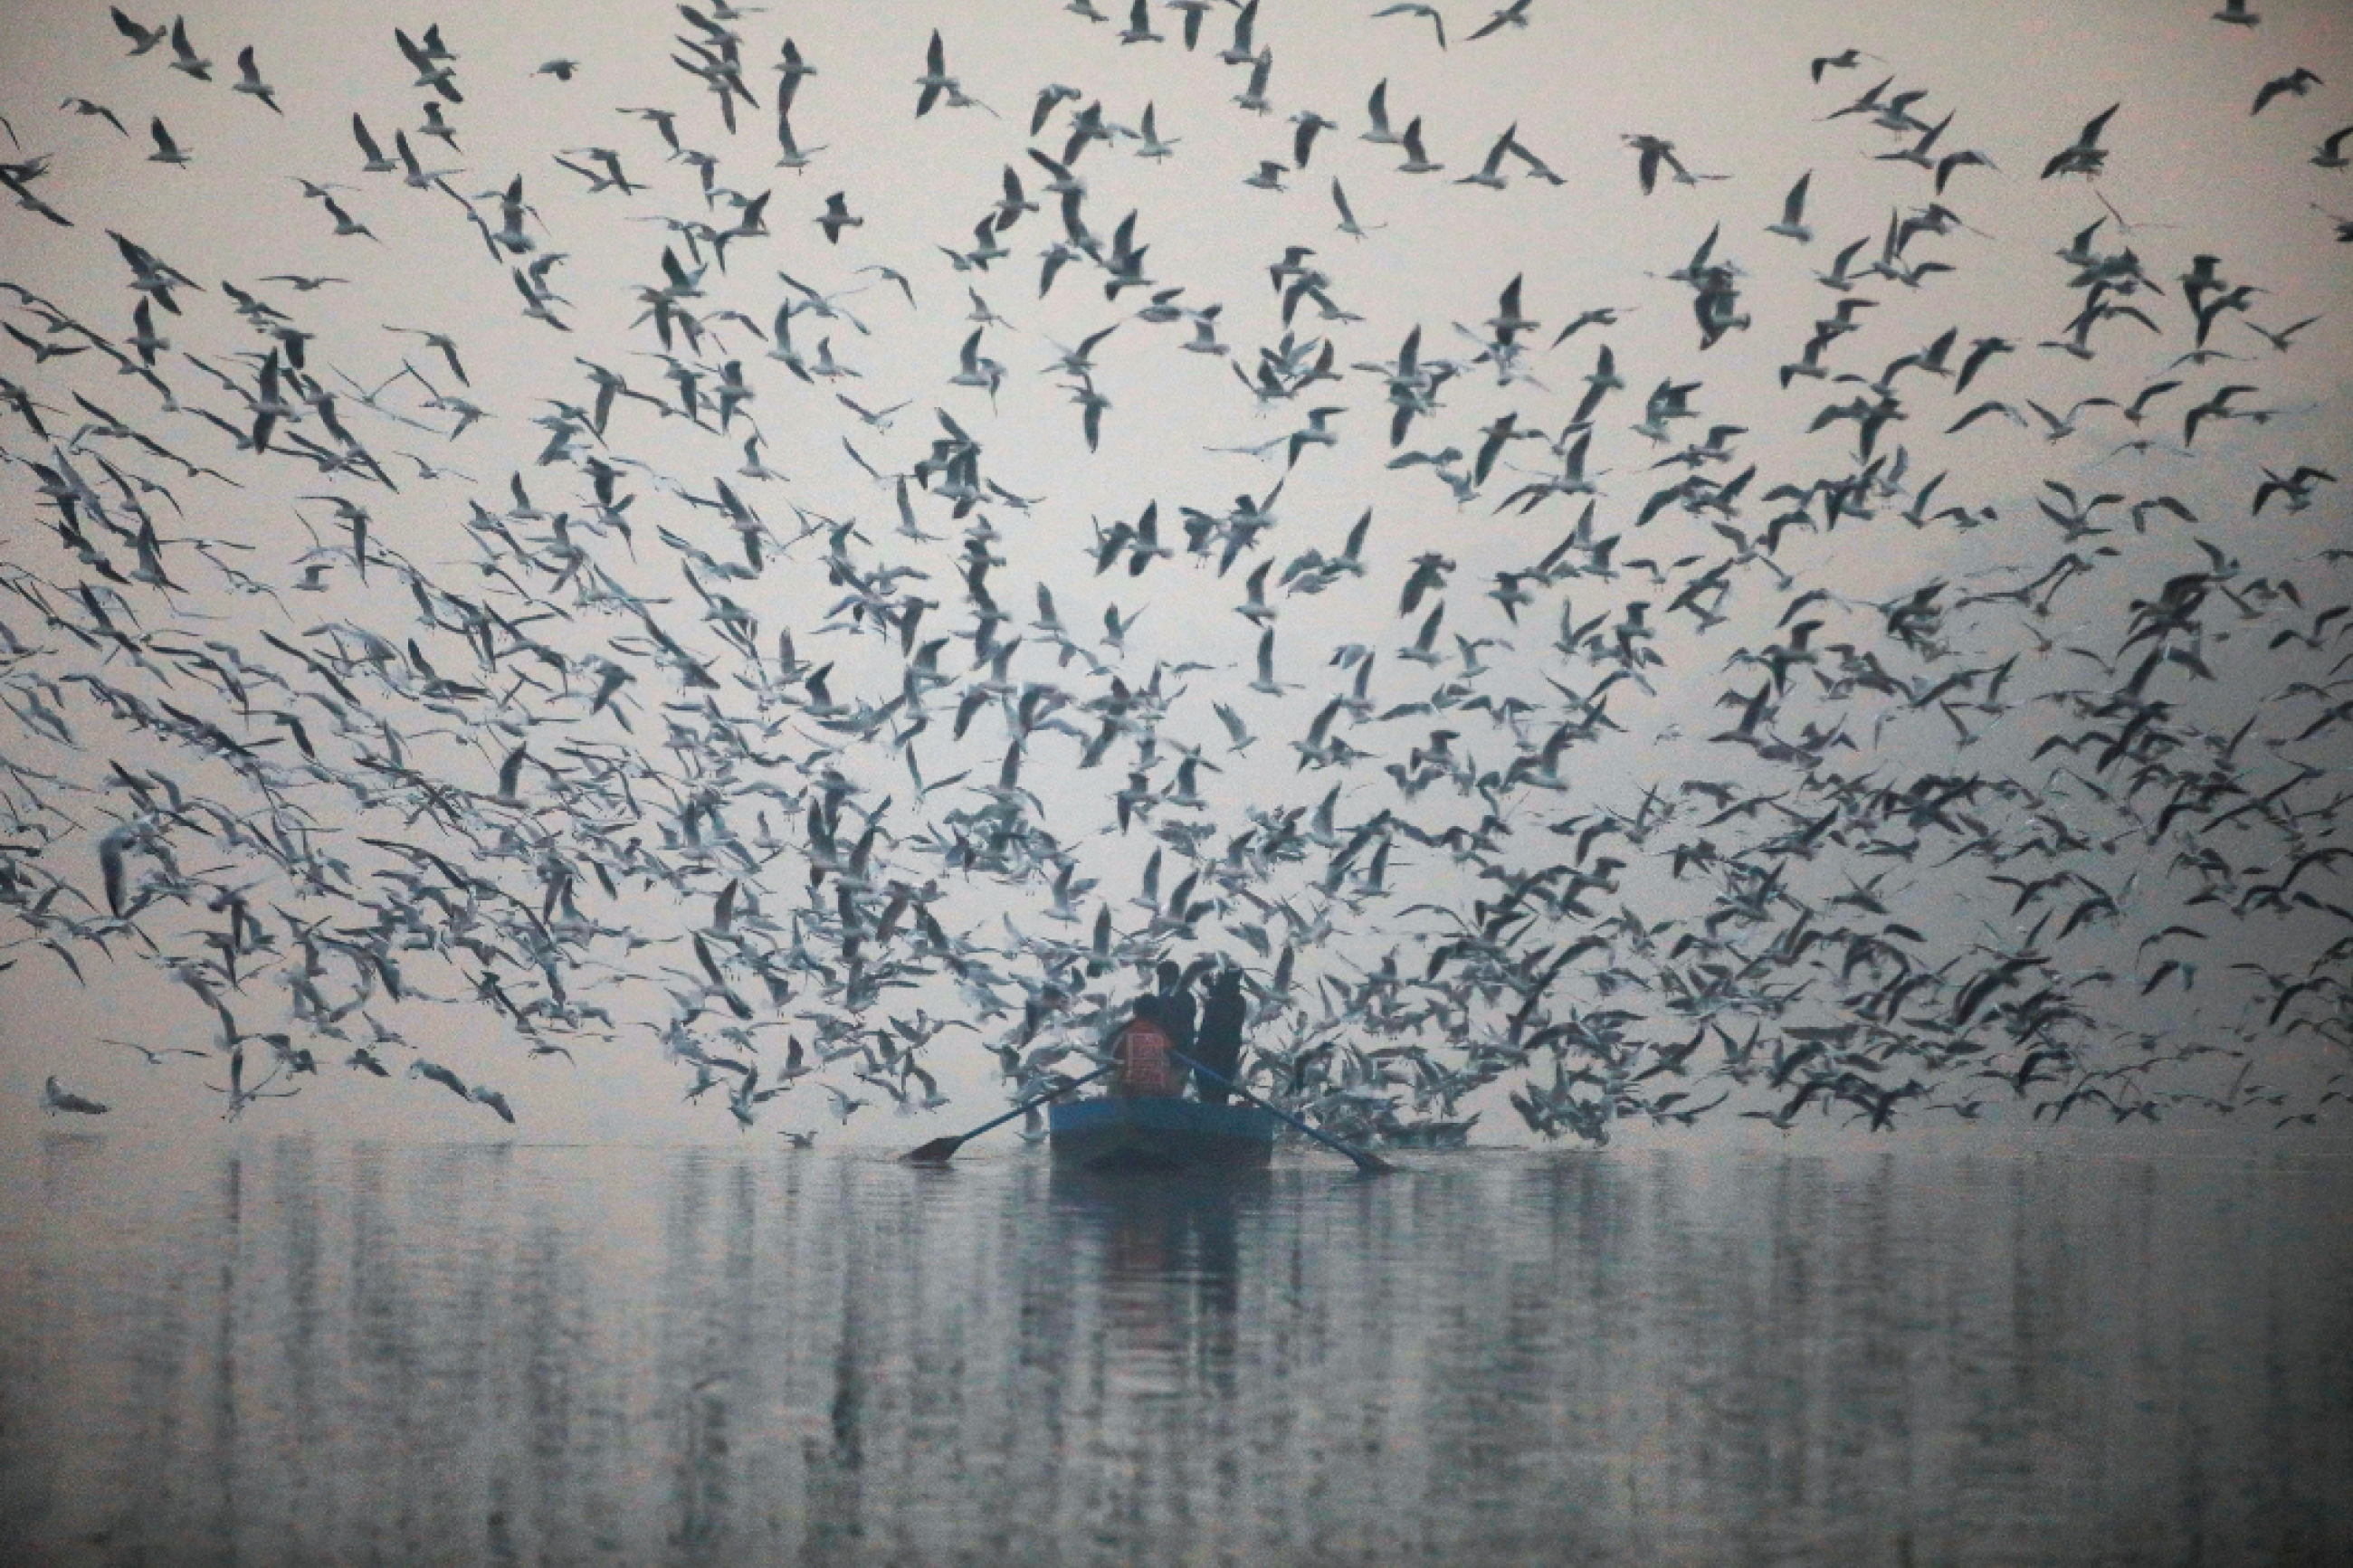 Dozens of seagulls swoop down to grab food from people in a small boat on the Yamuna River, on a smoggy morning in New Delhi, India, on November 18, 2021. 